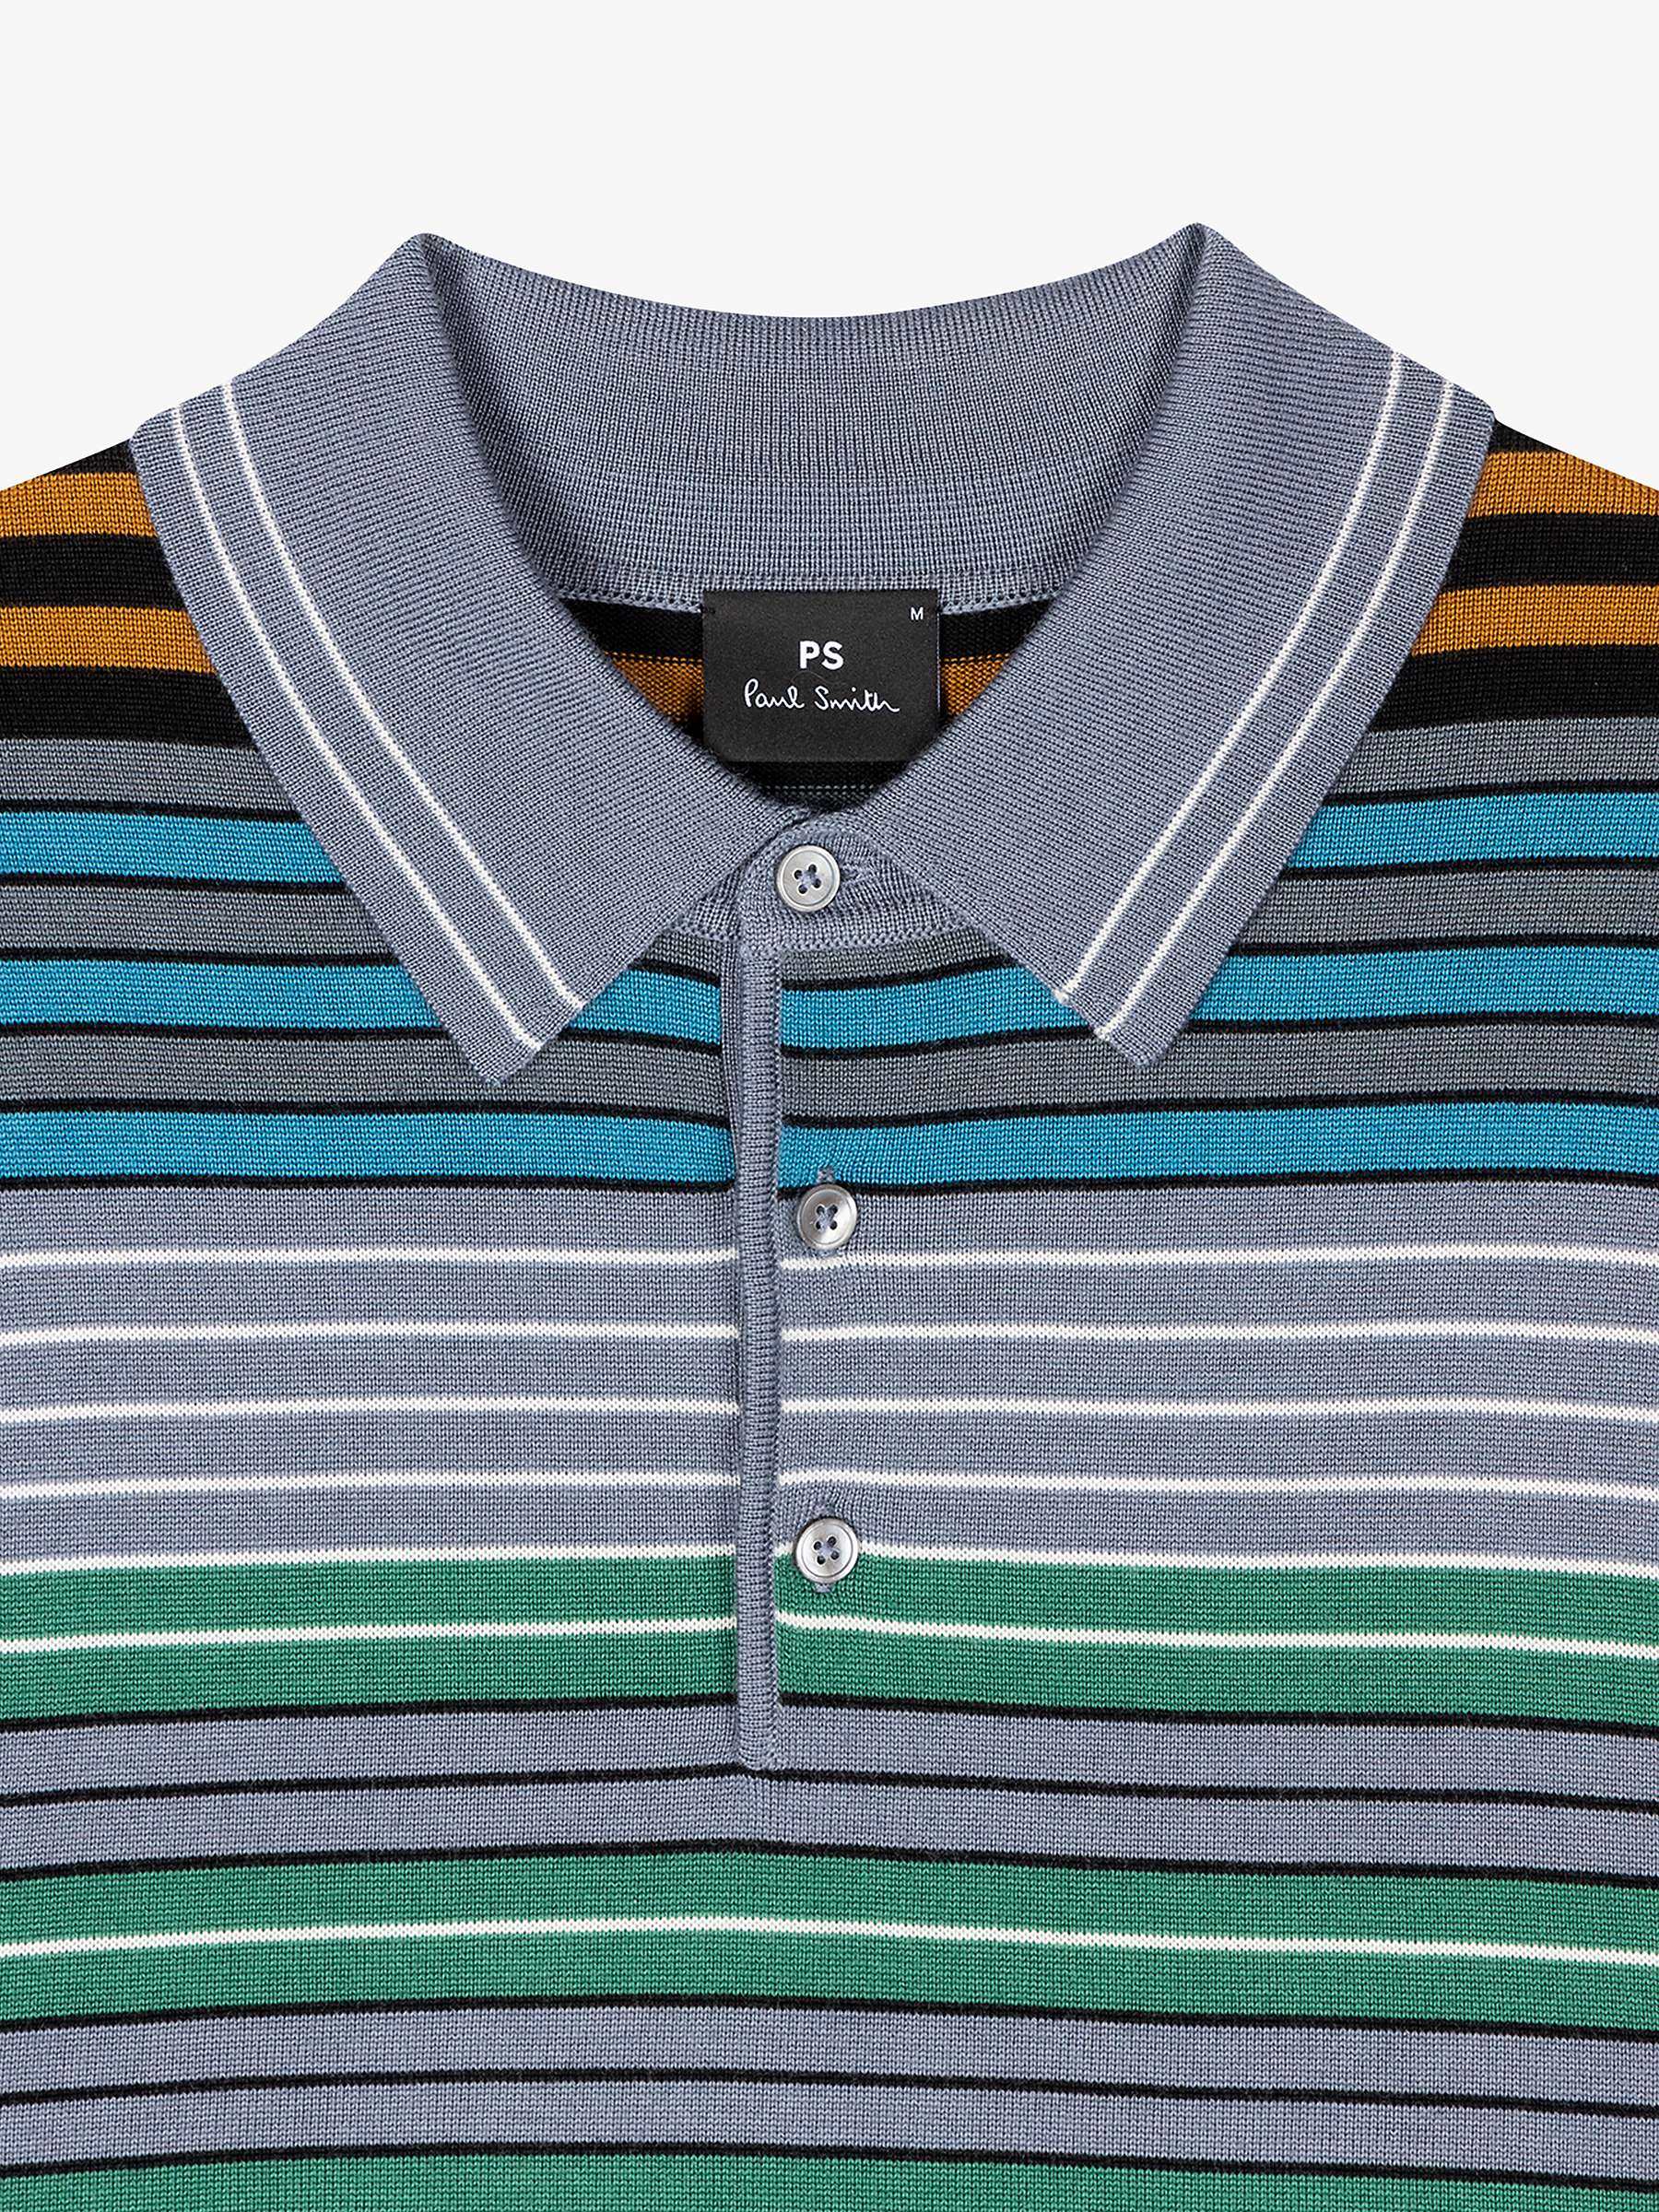 Buy PS Paul Smith Short Sleeve All-Over Stripe Polo Shirt, Grey/Multi Online at johnlewis.com